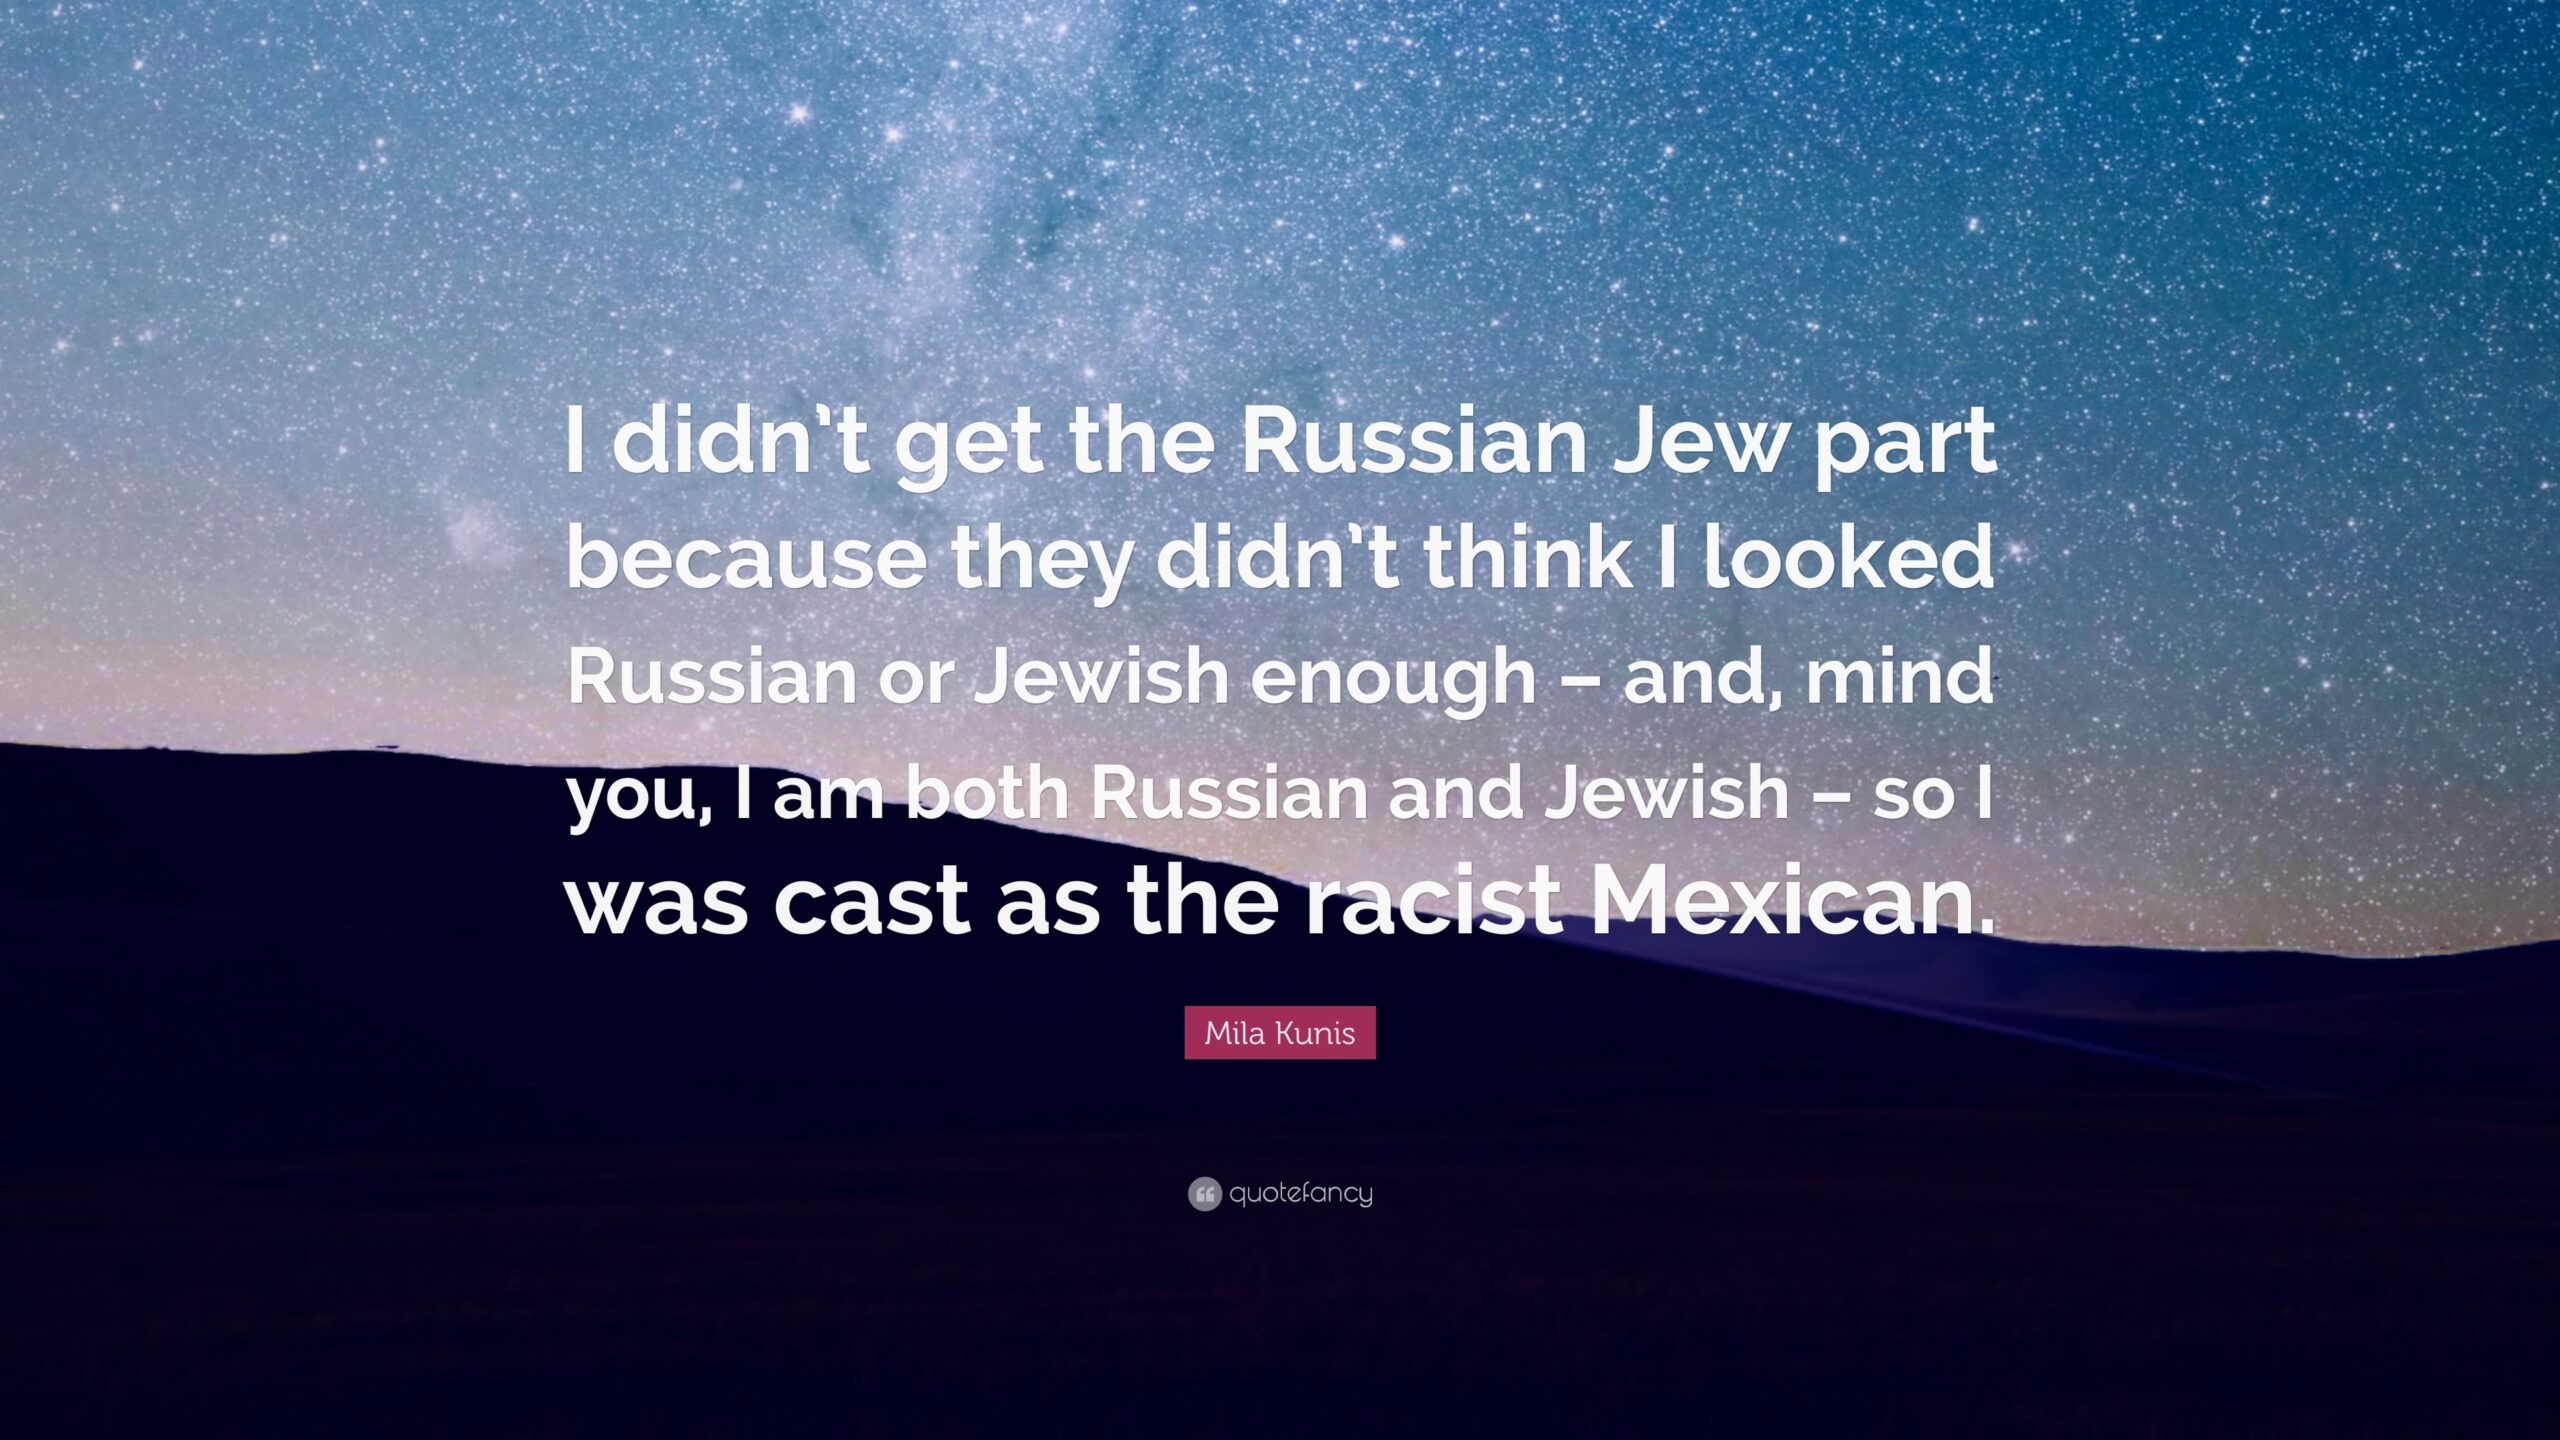 Mila Kunis Quote “I didn’t get the Russian Jew part because they